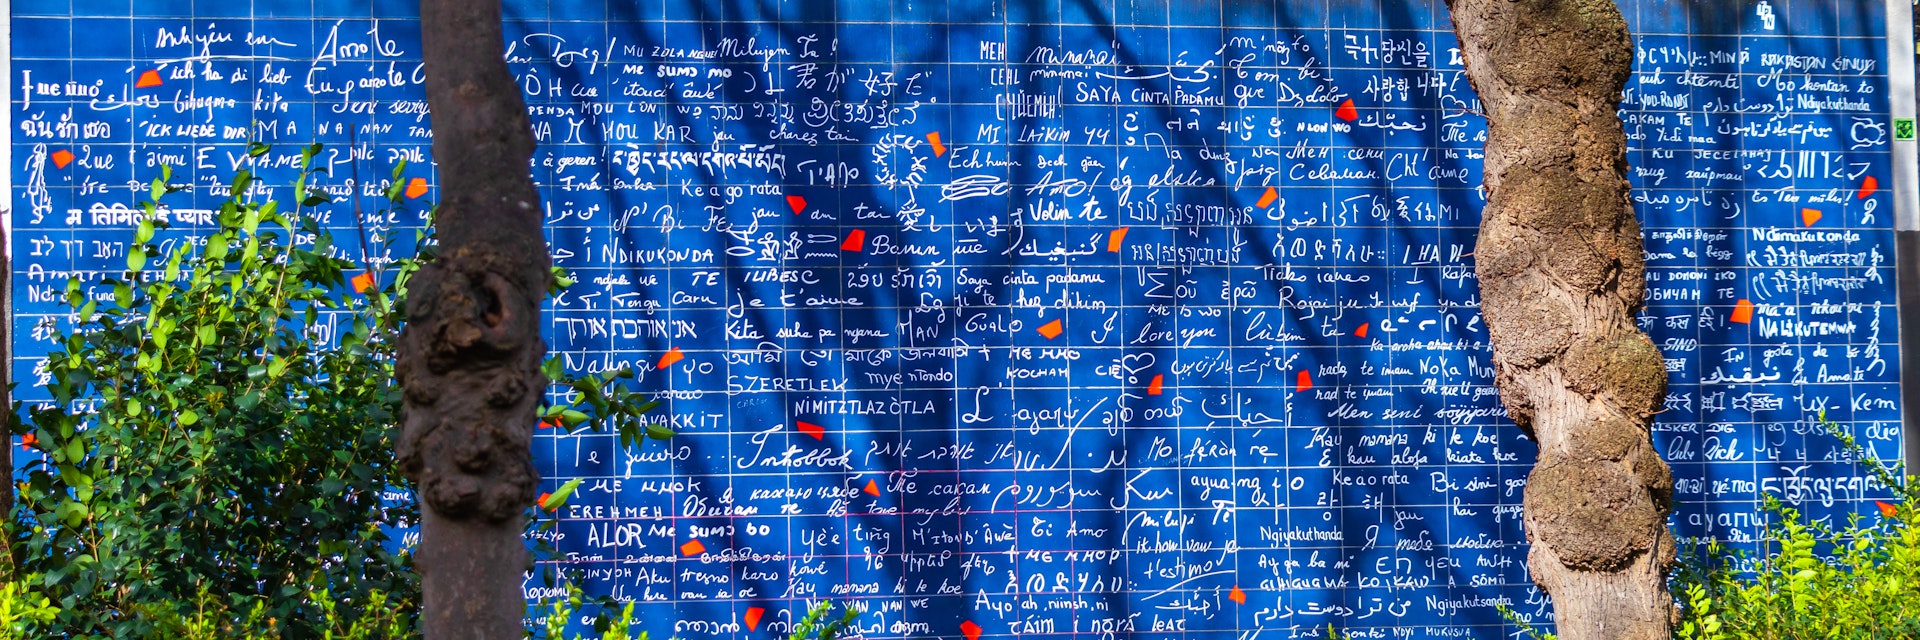 The "wall of love" in Paris.